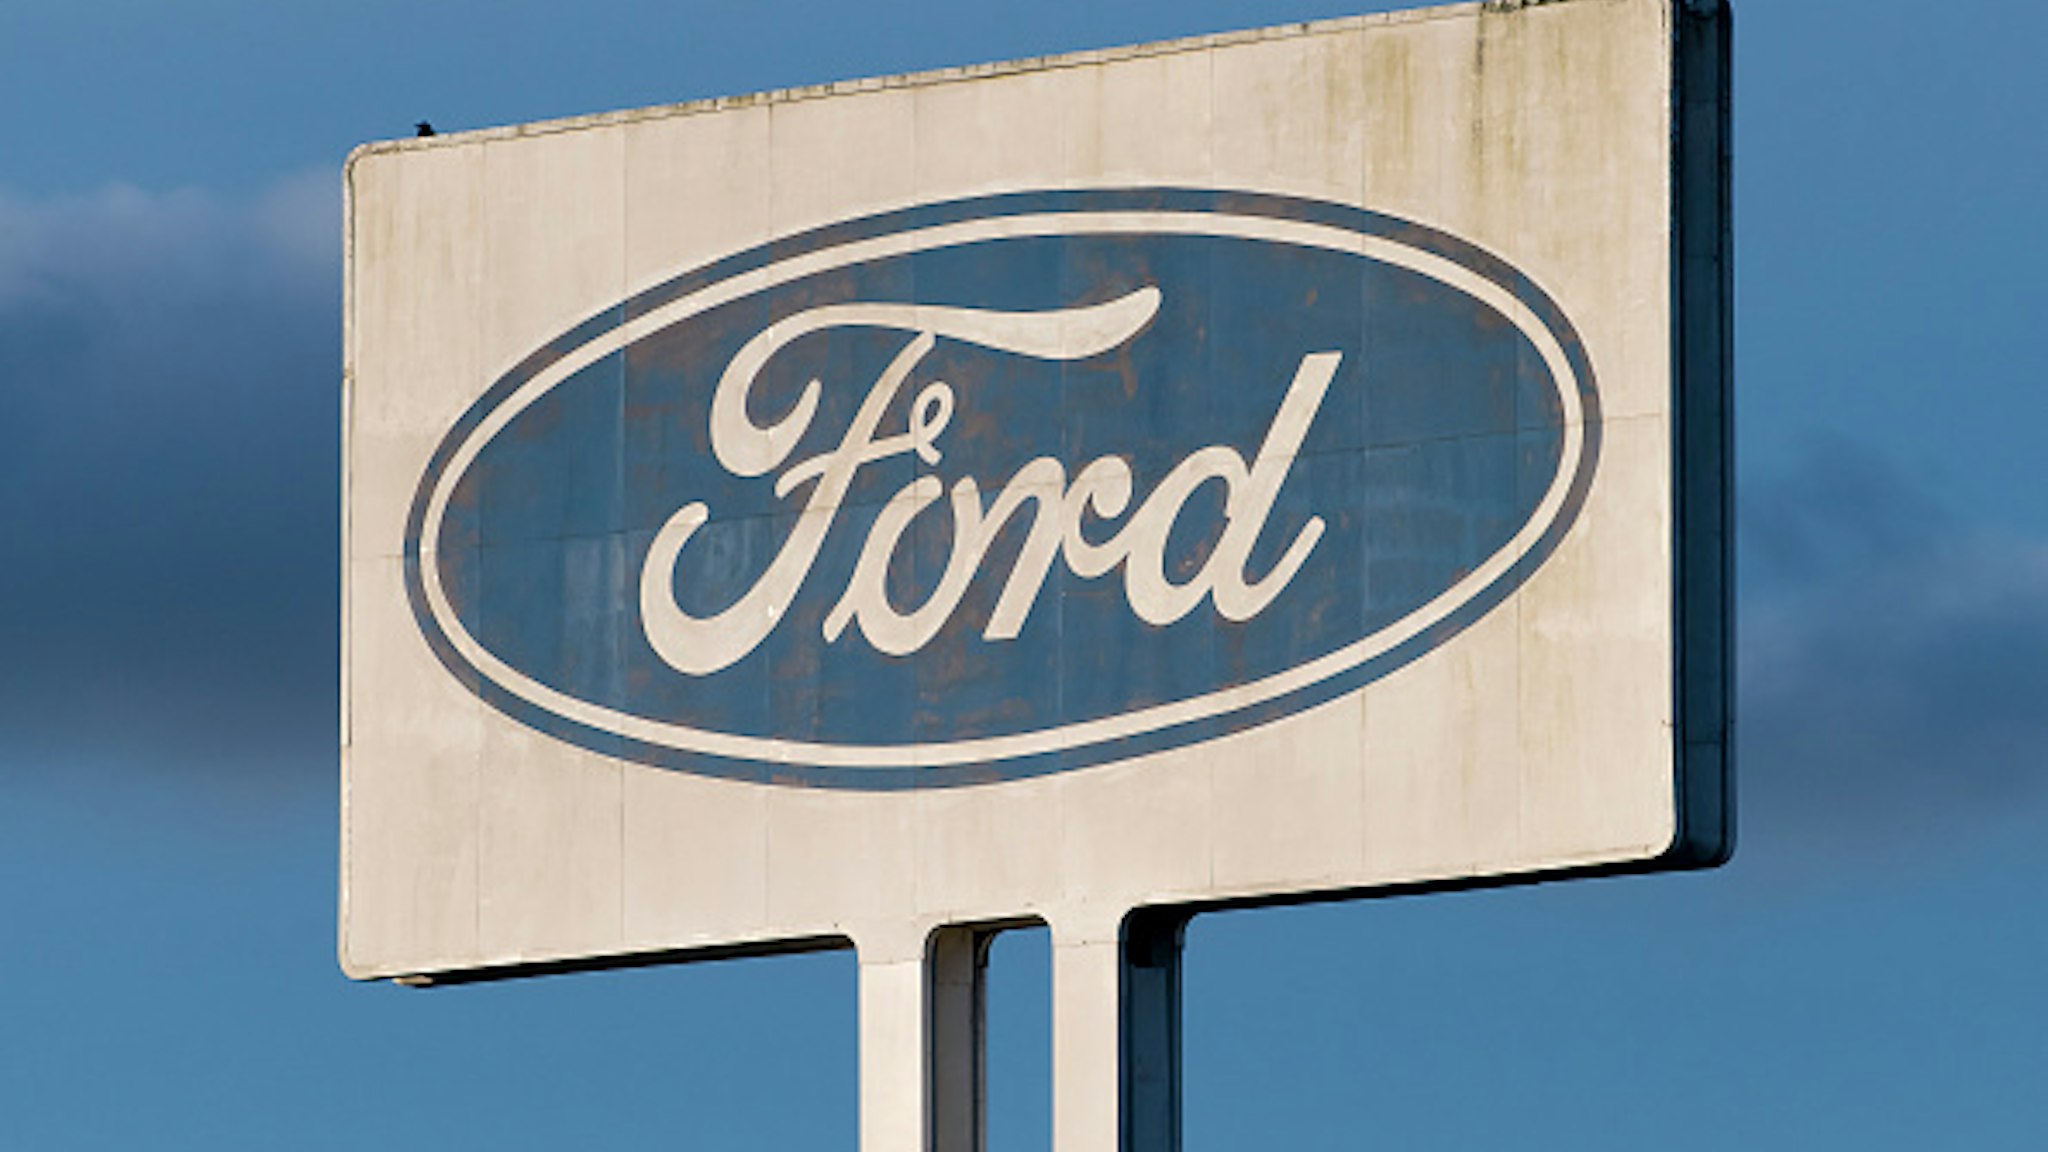 BRIDGEND, WALES - JUNE 05: A close-up of the Bridgend Ford Engine plant sign on June 5, 2019 in Bridgend, Wales. Union sources have said the engine plant in Bridgend will close in September 2020. The British car industry is facing a series of difficulties including a fall in demand for diesel vehicles and a deteriorating sales trend in the Far East.